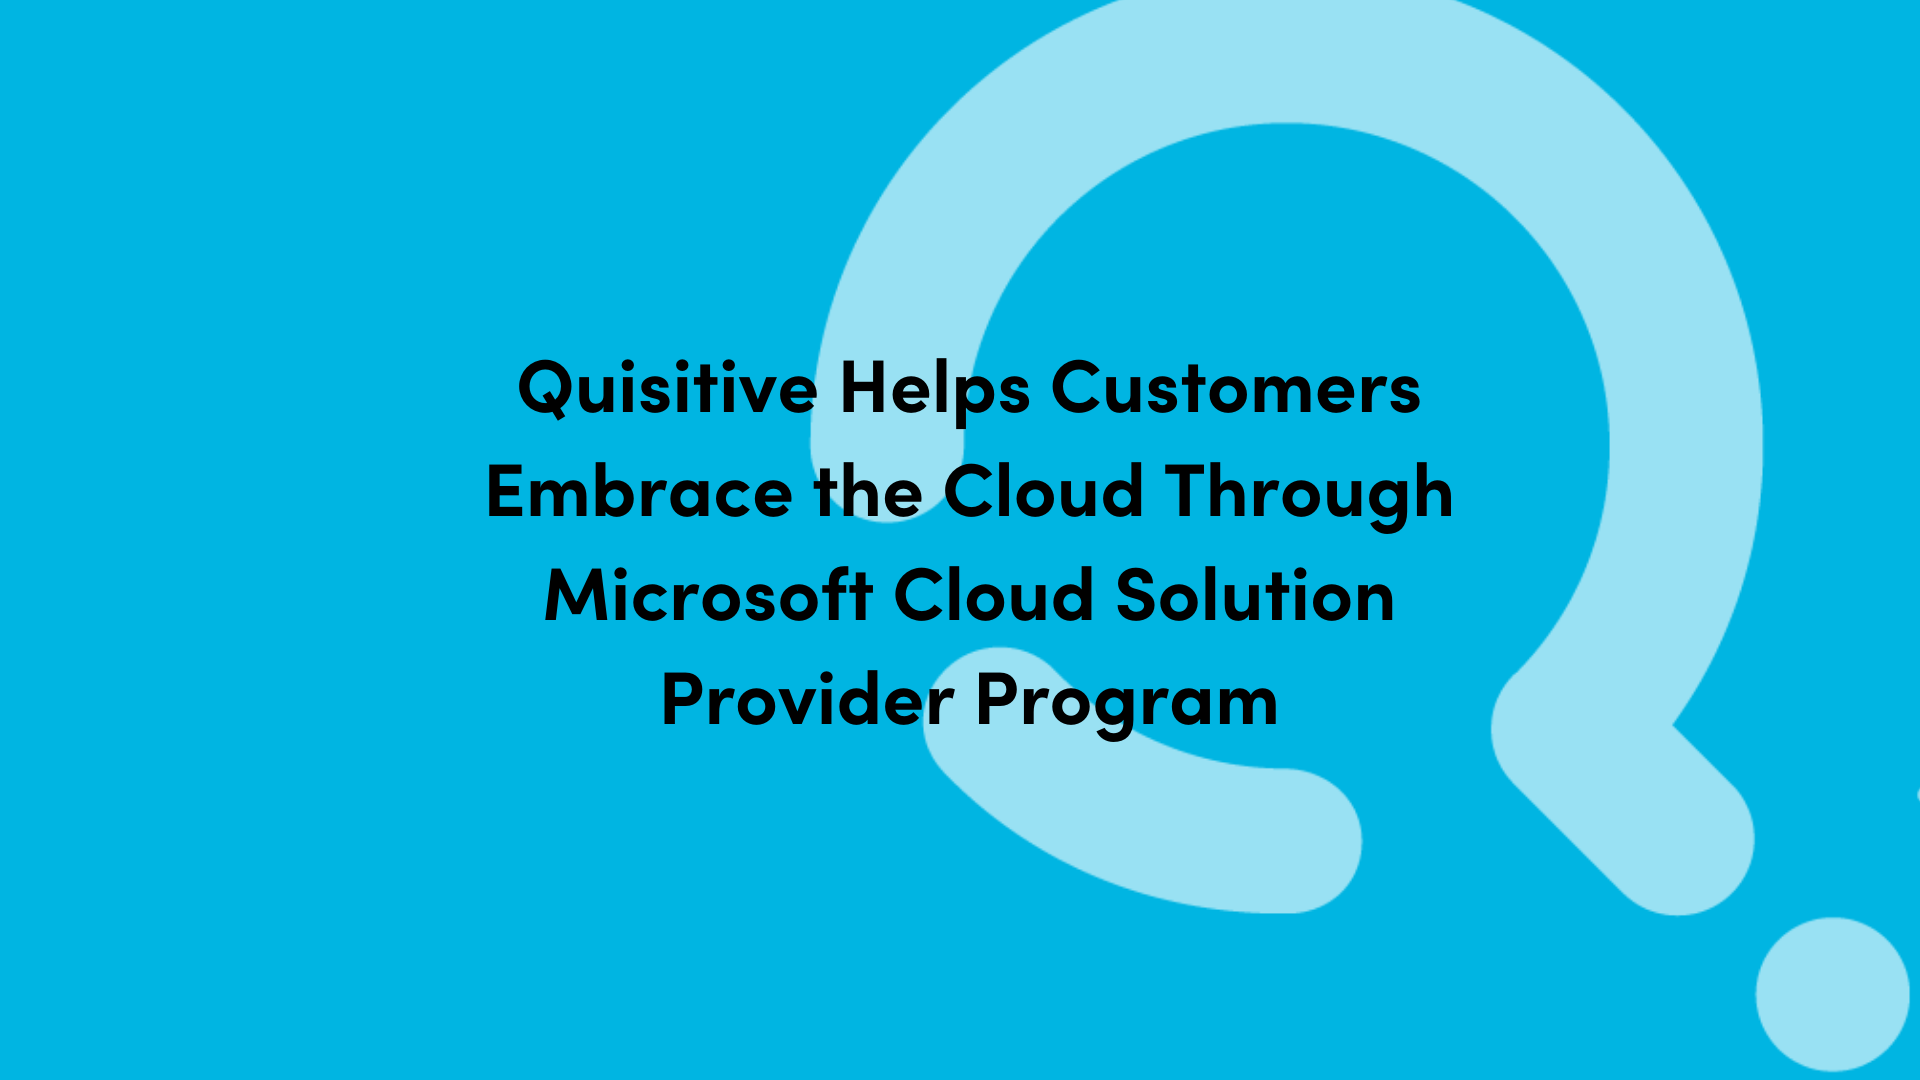 Blue background with Quisitive logo and text that reads Quisitive helps customers embrace the cloud through Microsoft cloud solution provider program